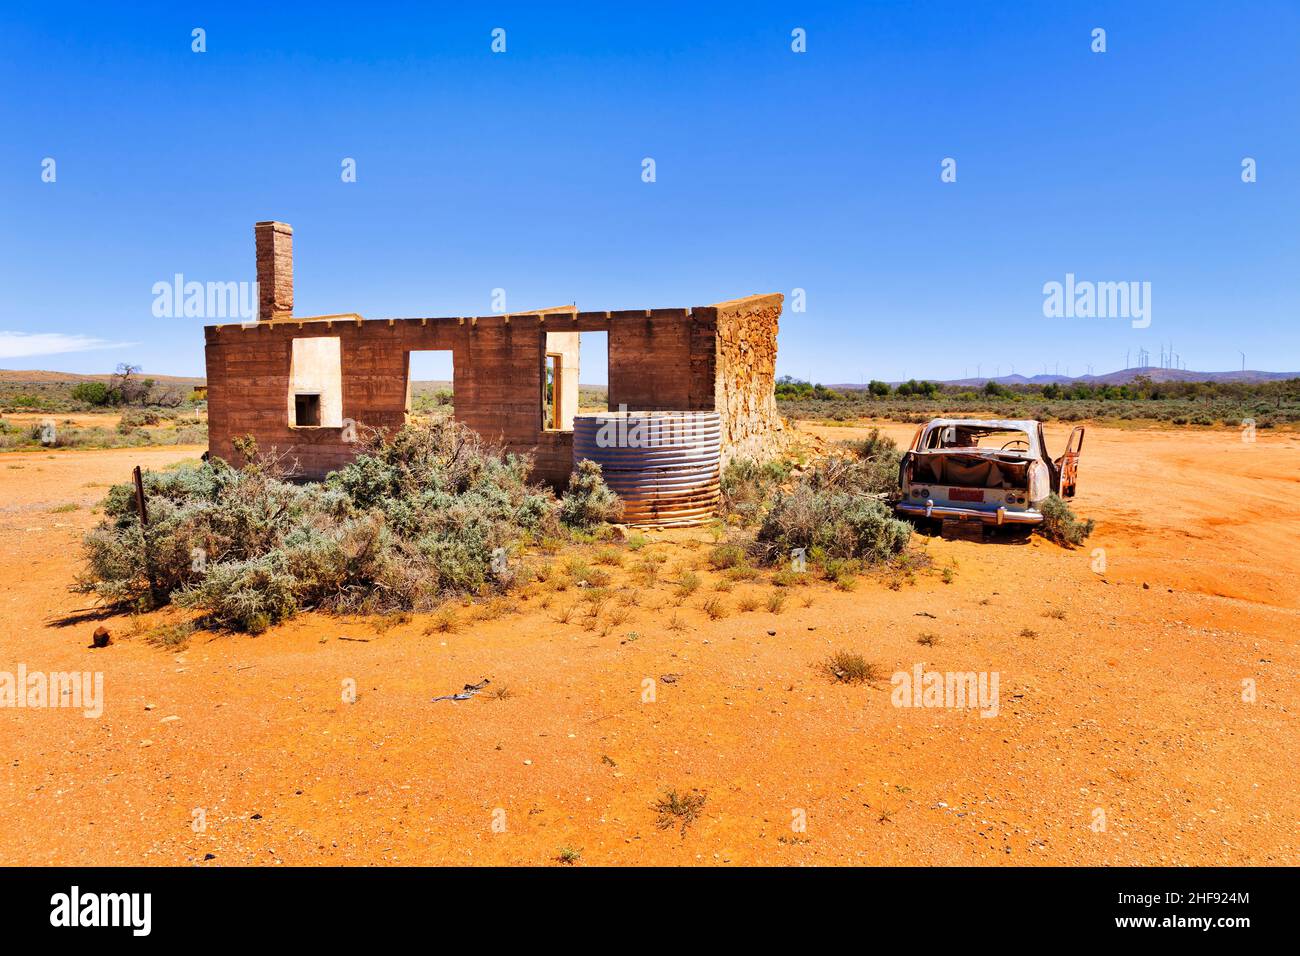 Ruins of old historic brick stone house with wreckage of old rustic car in Silverton town of Australian outback. Stock Photo